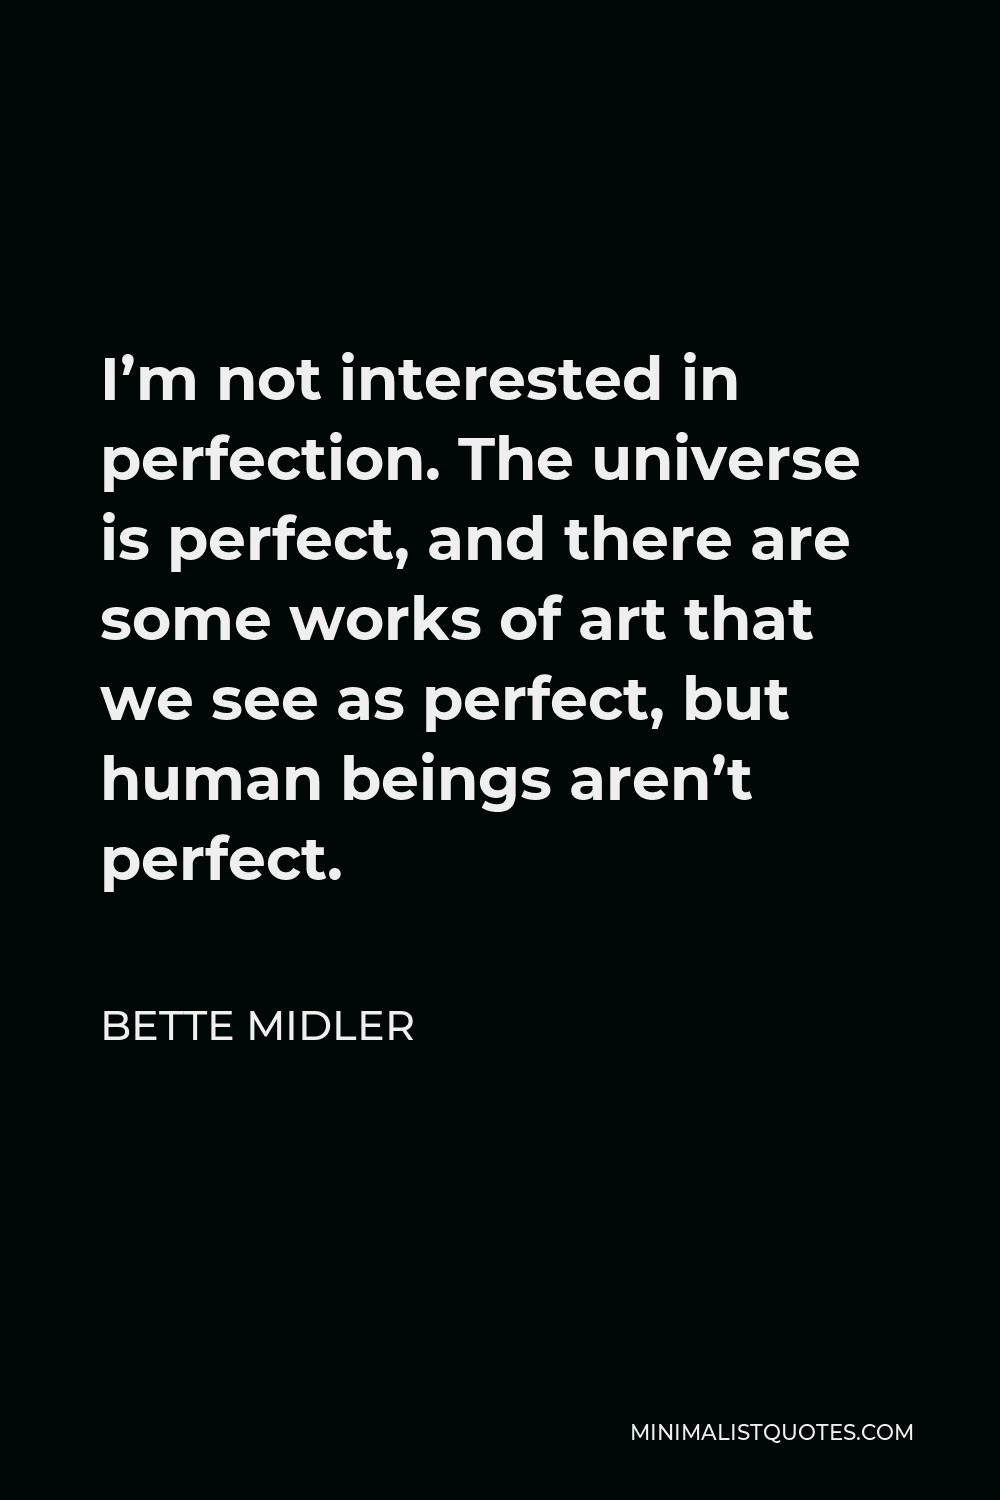 Bette Midler Quote - I’m not interested in perfection. The universe is perfect, and there are some works of art that we see as perfect, but human beings aren’t perfect.